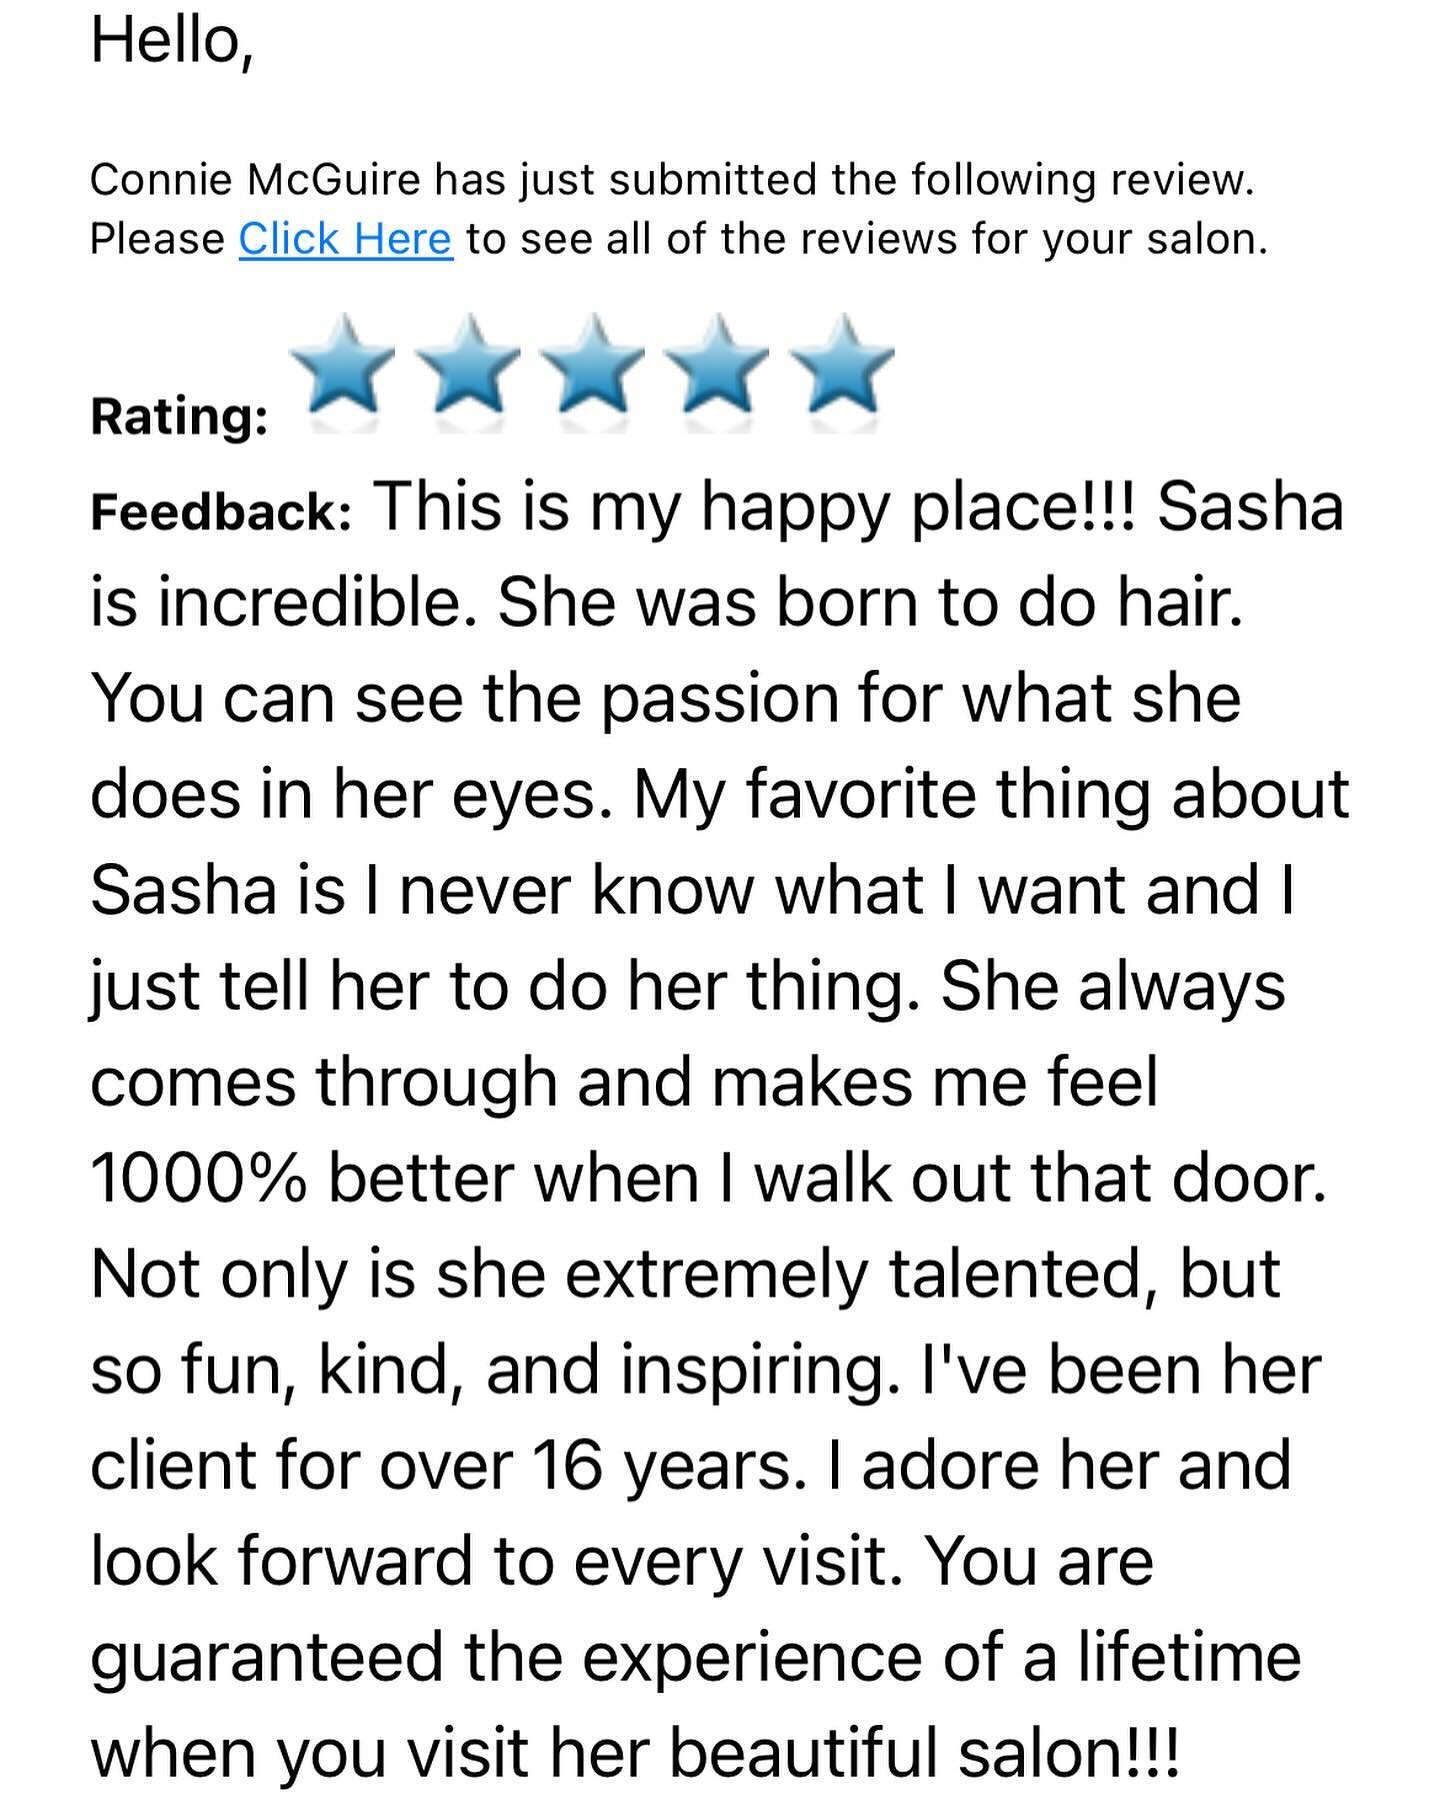 I love what I do. But I especially love when people love what I do. And even more when they feel better because of it. ❤️❤️❤️❤️ thank you Connie for the amazing review